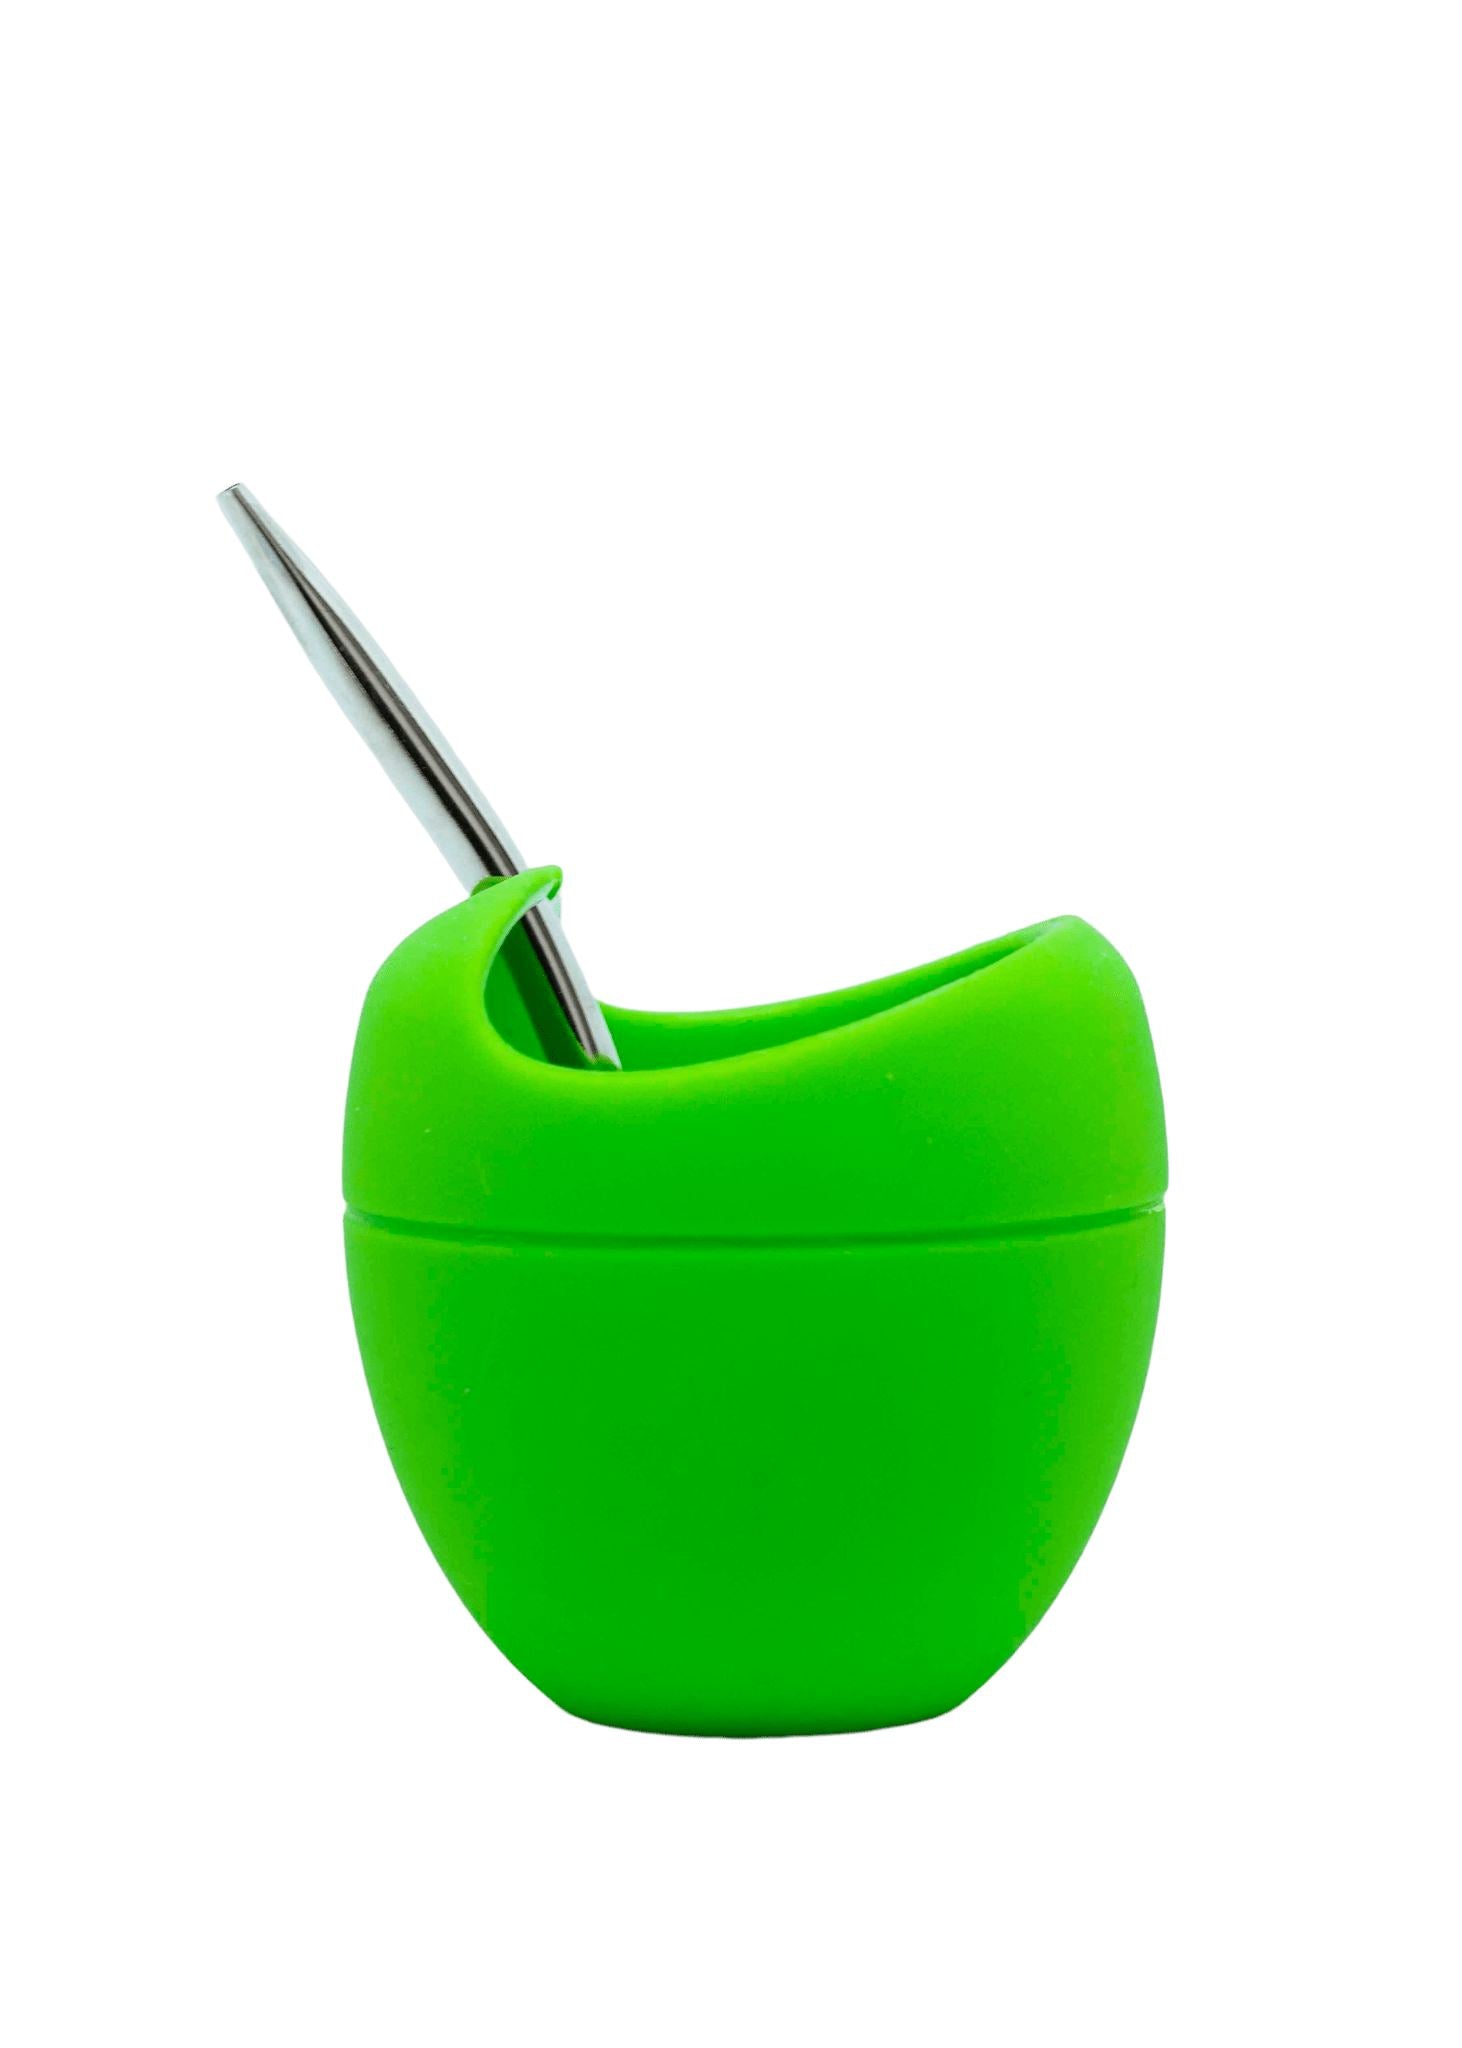 Mateo Silicone Mate Gourd with Straw - Green (Mate and Bombilla) Mates Hispanic Pantry 